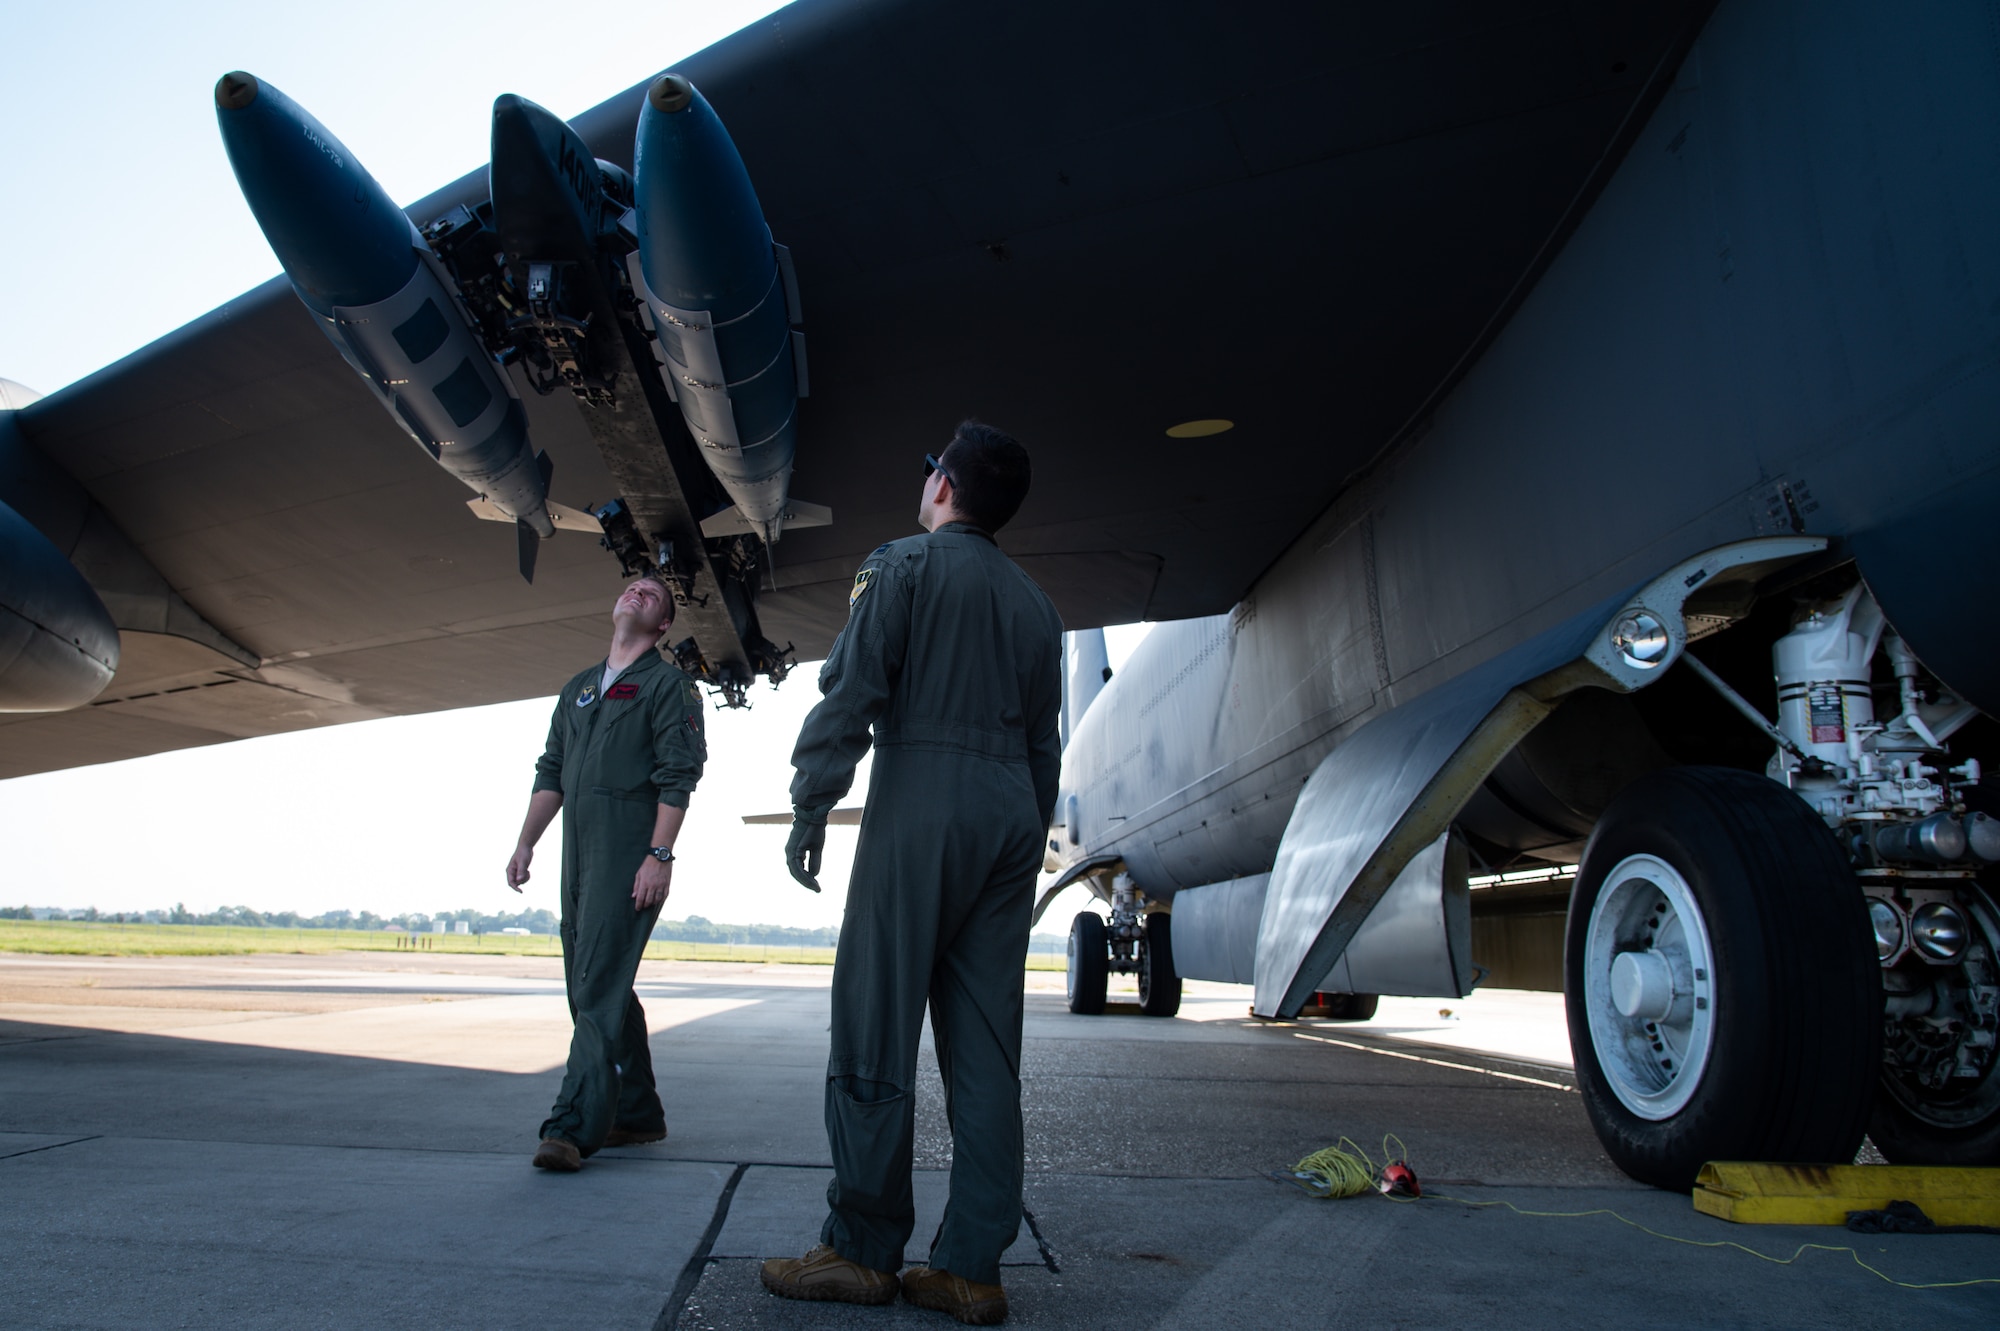 Maj. James Bell, 96th Bomb Squadron aircraft commander, and Capt. Phillip Hightower, 96th BS co-pilot, inspect conventional munitions before takeoff at Barksdale Air Force Base, Louisiana, Aug. 25, 2021. Inspecting munitions is part of an important pre-flight checklist vital to ensuring flight safety and proper weapon functionality. (U.S. Air Force photo by Airman 1st Class Chase Sullivan)